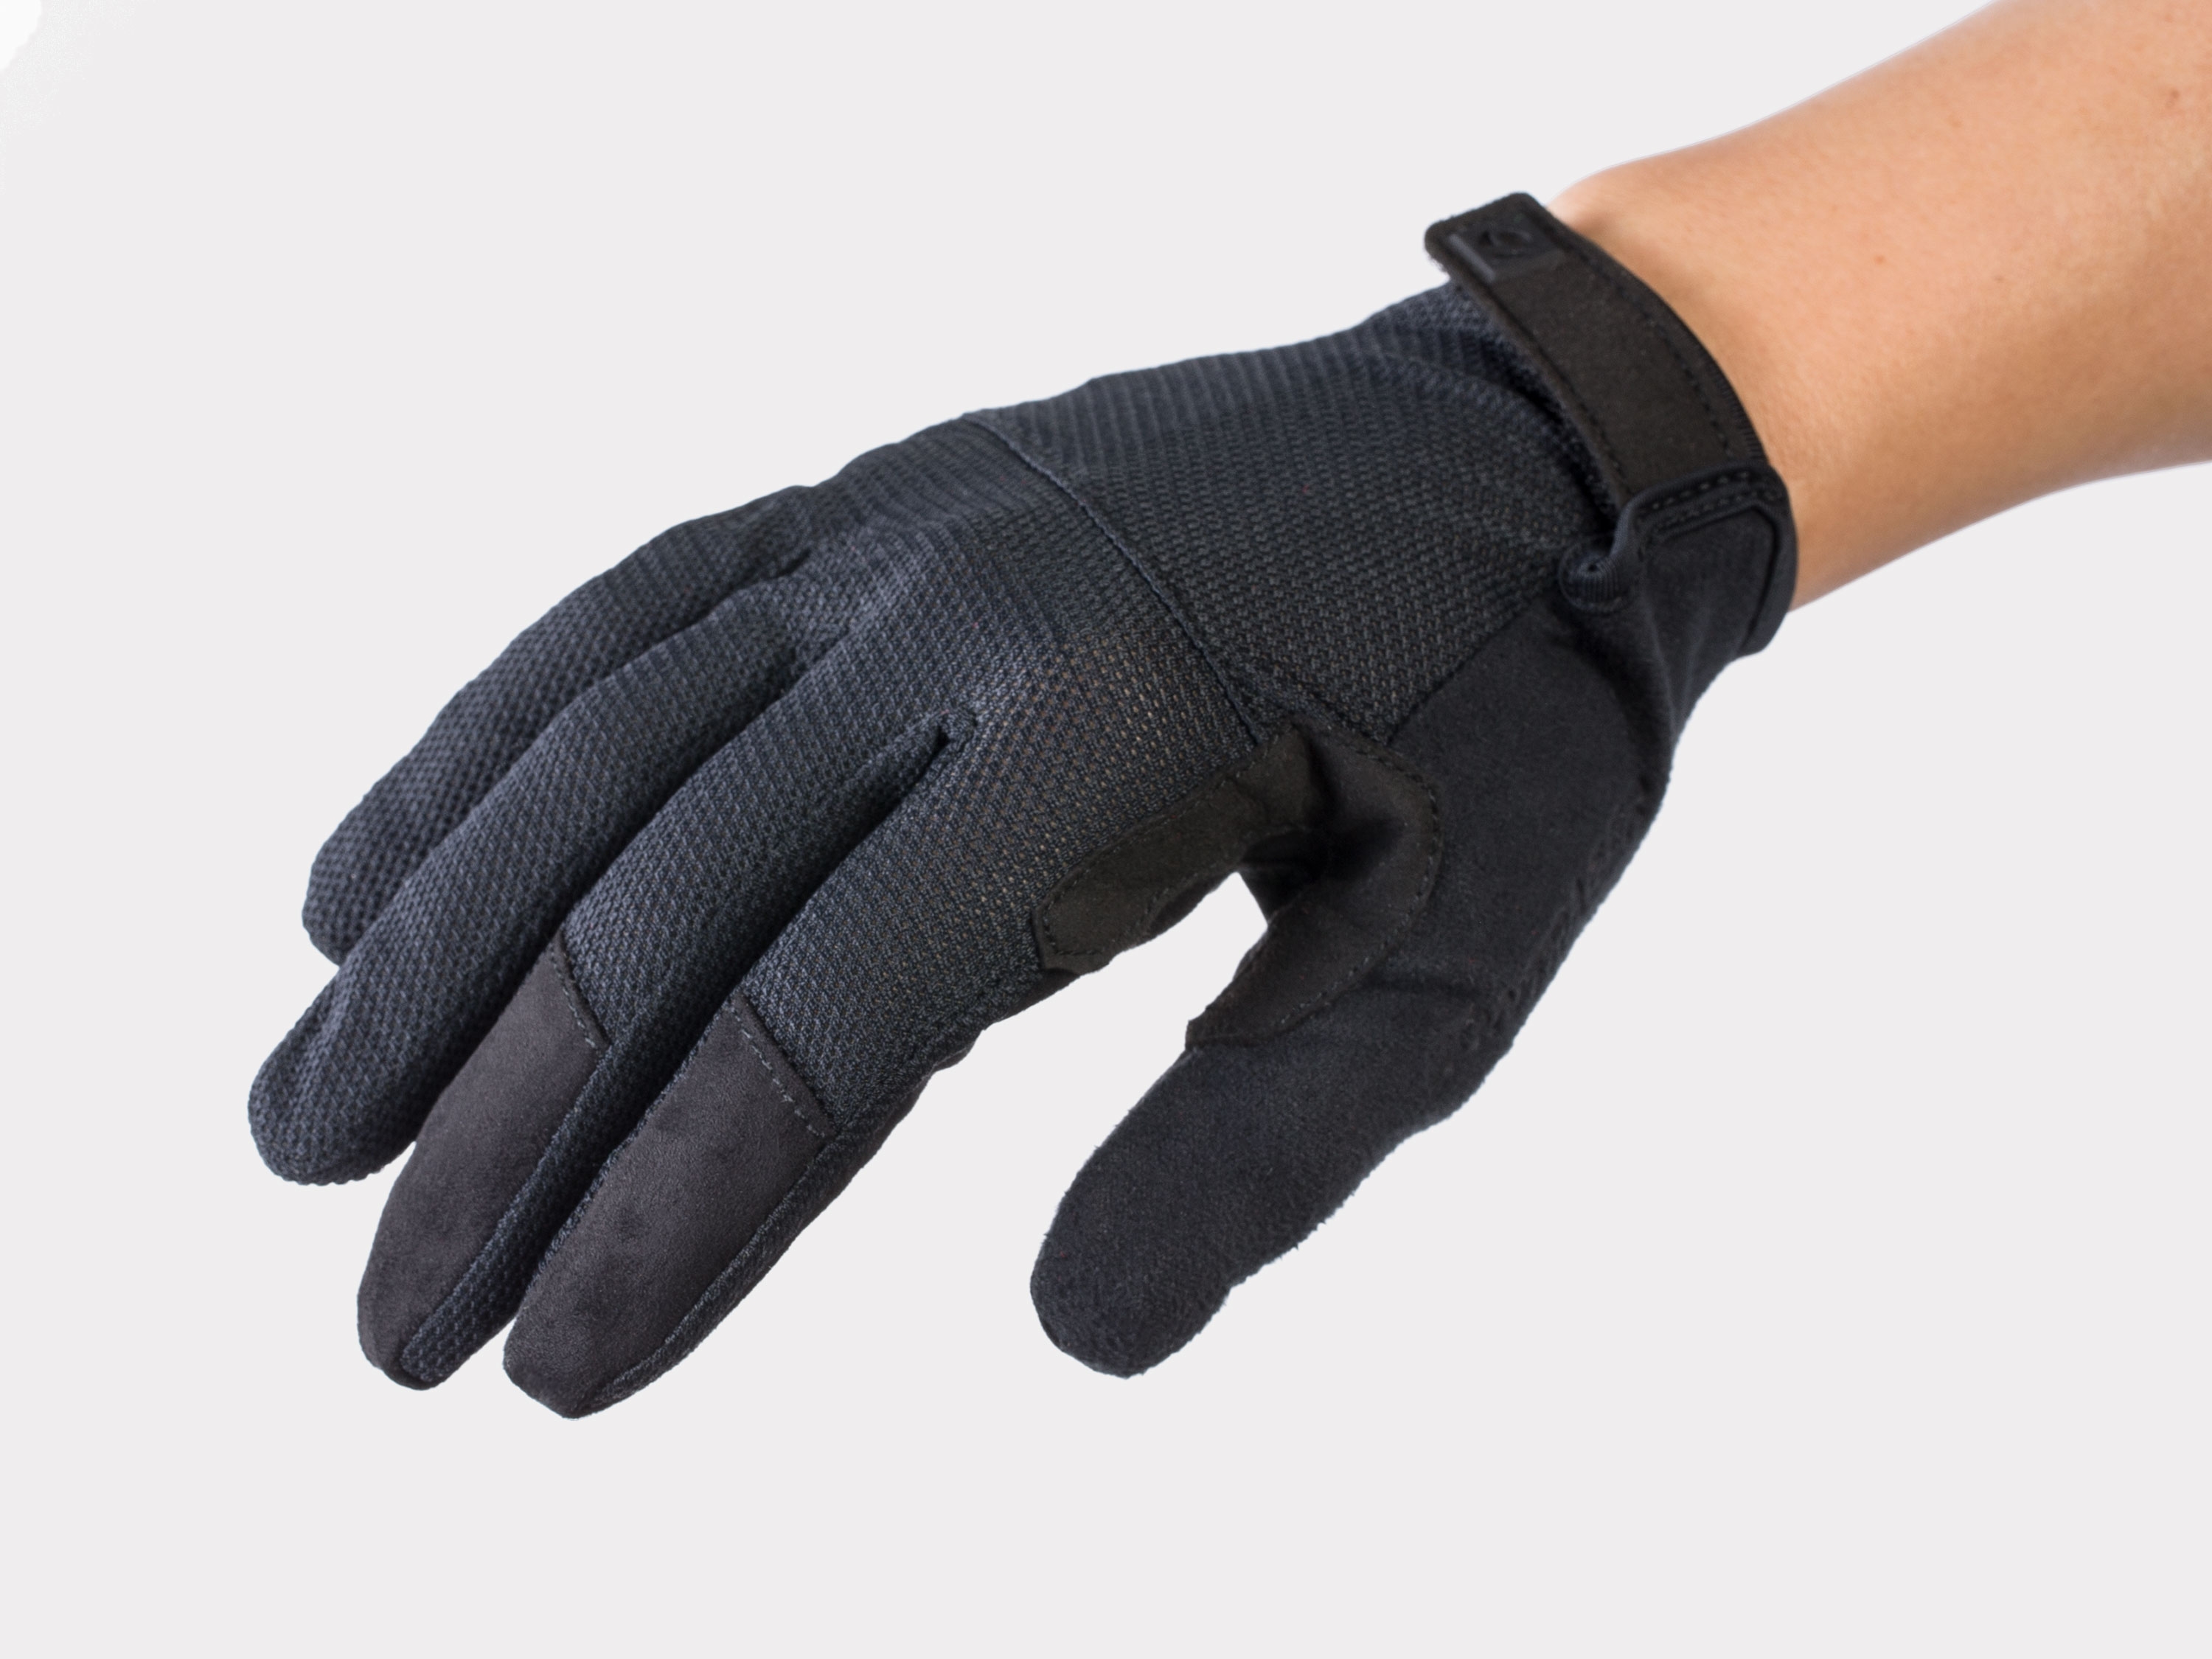 bontrager women's cycling gloves